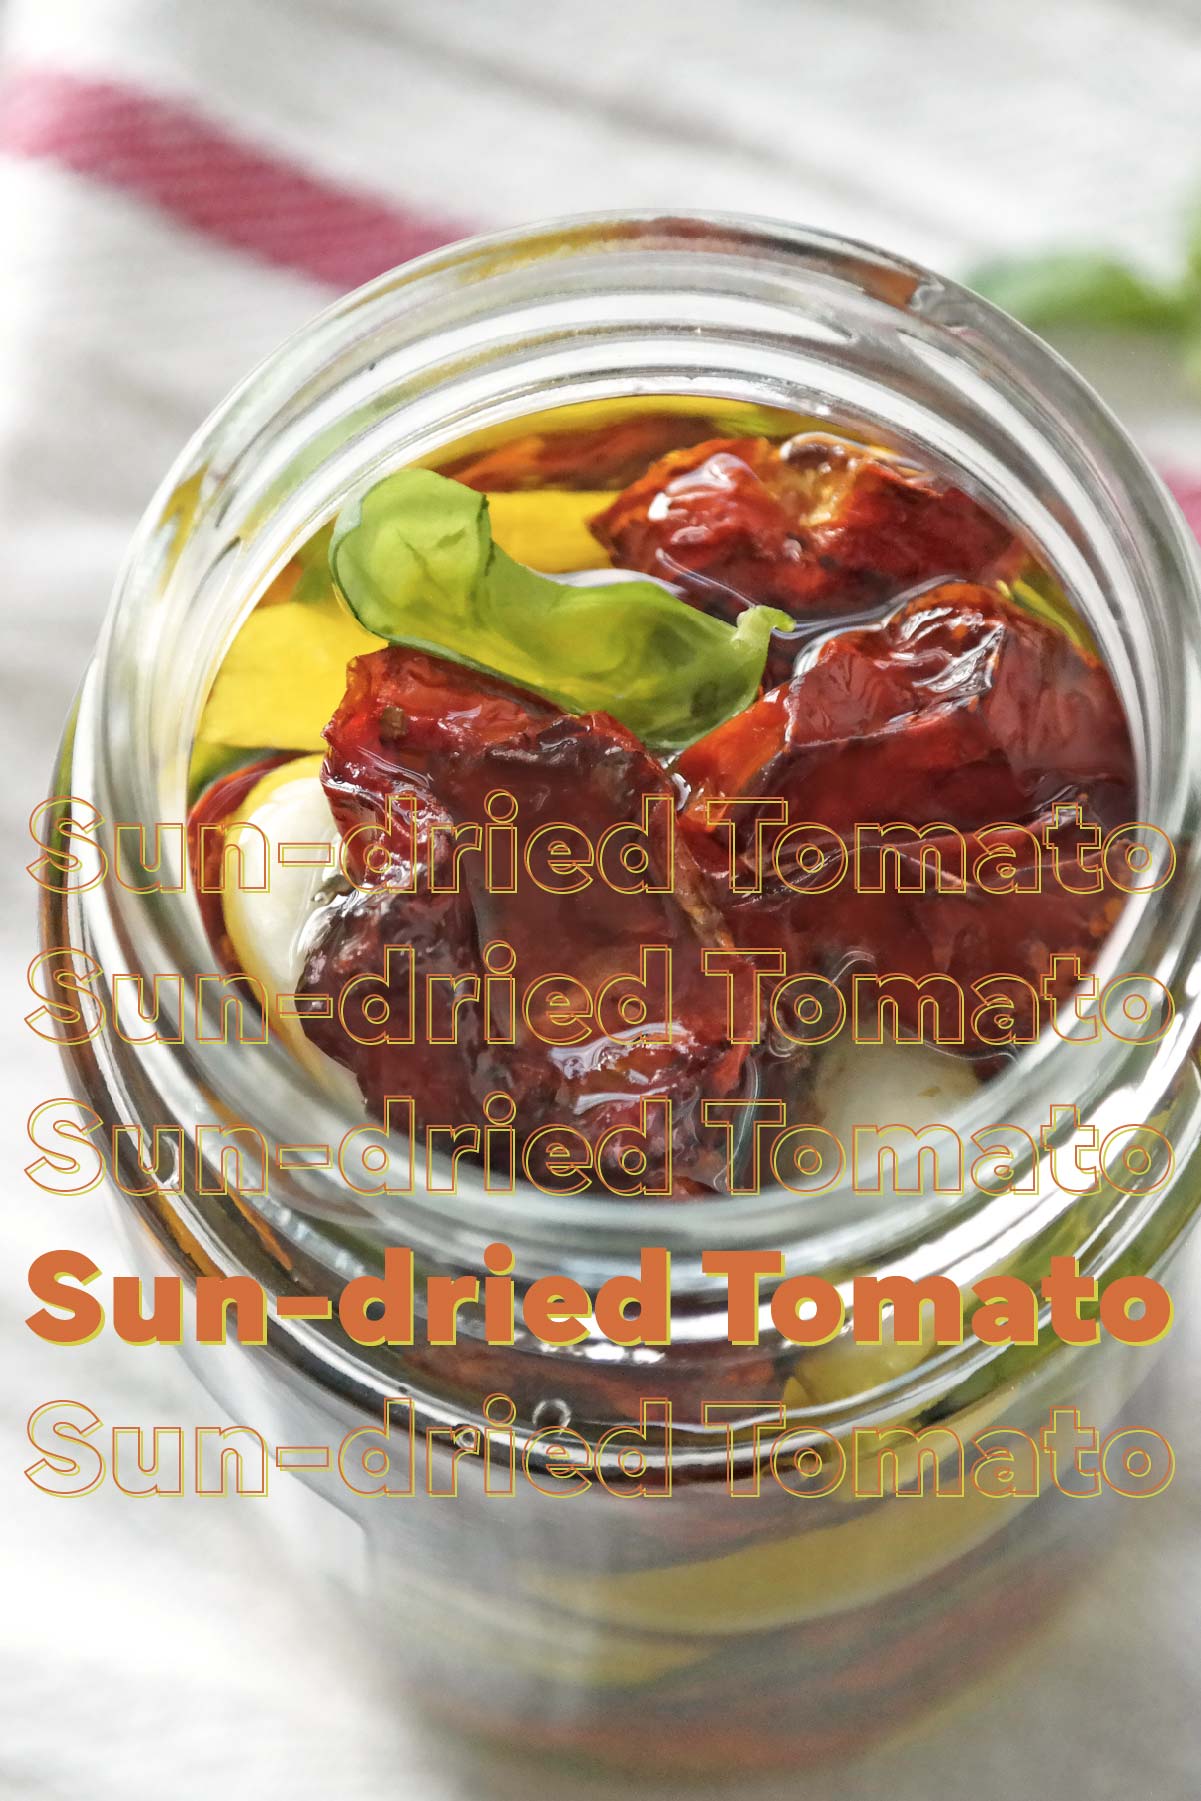 Sundried Tomato in a jar